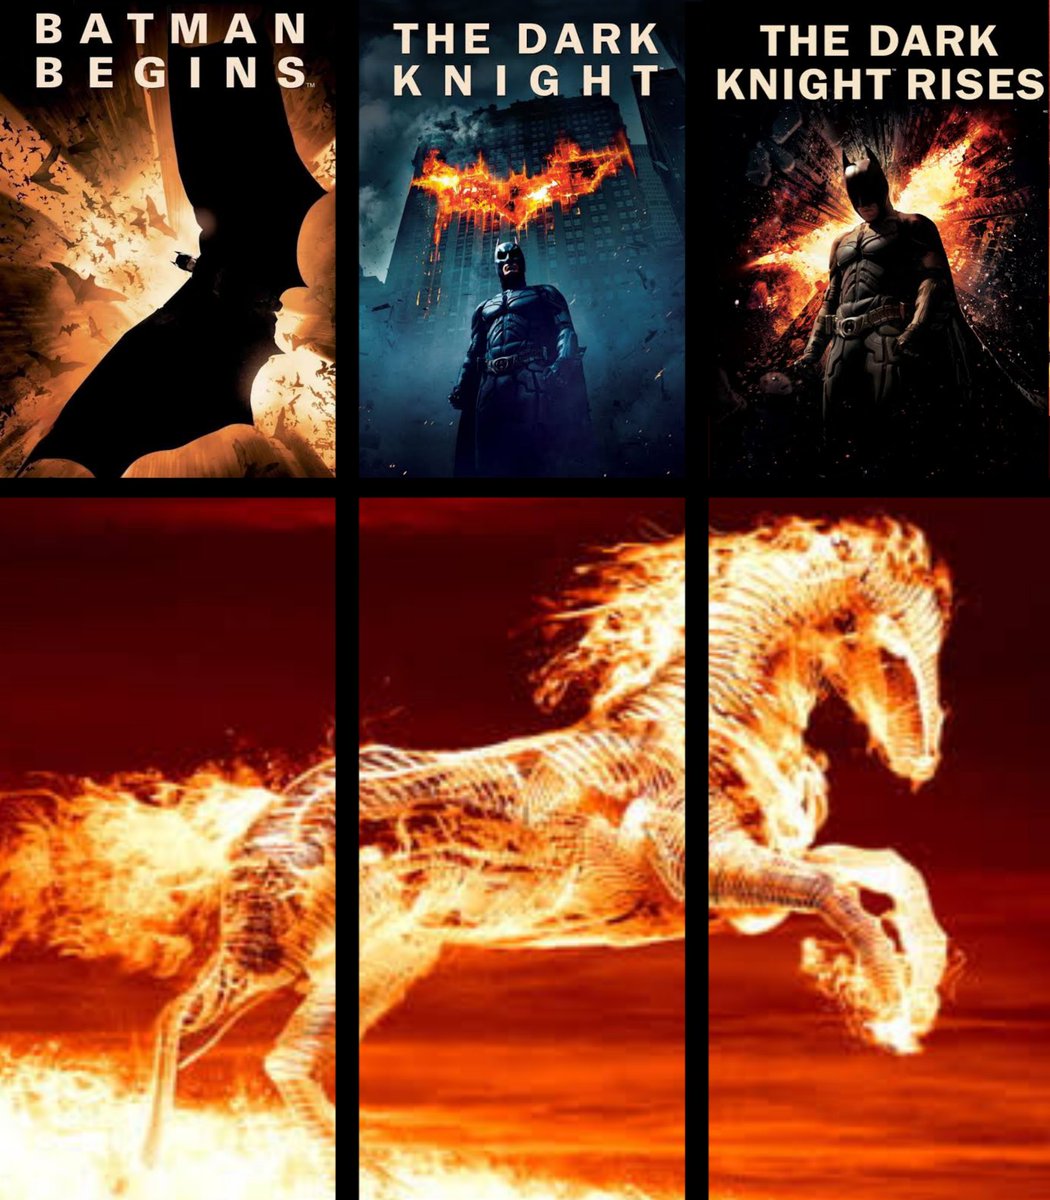 The Dark Knight Trilogy is the best superhero trilogy ever made!